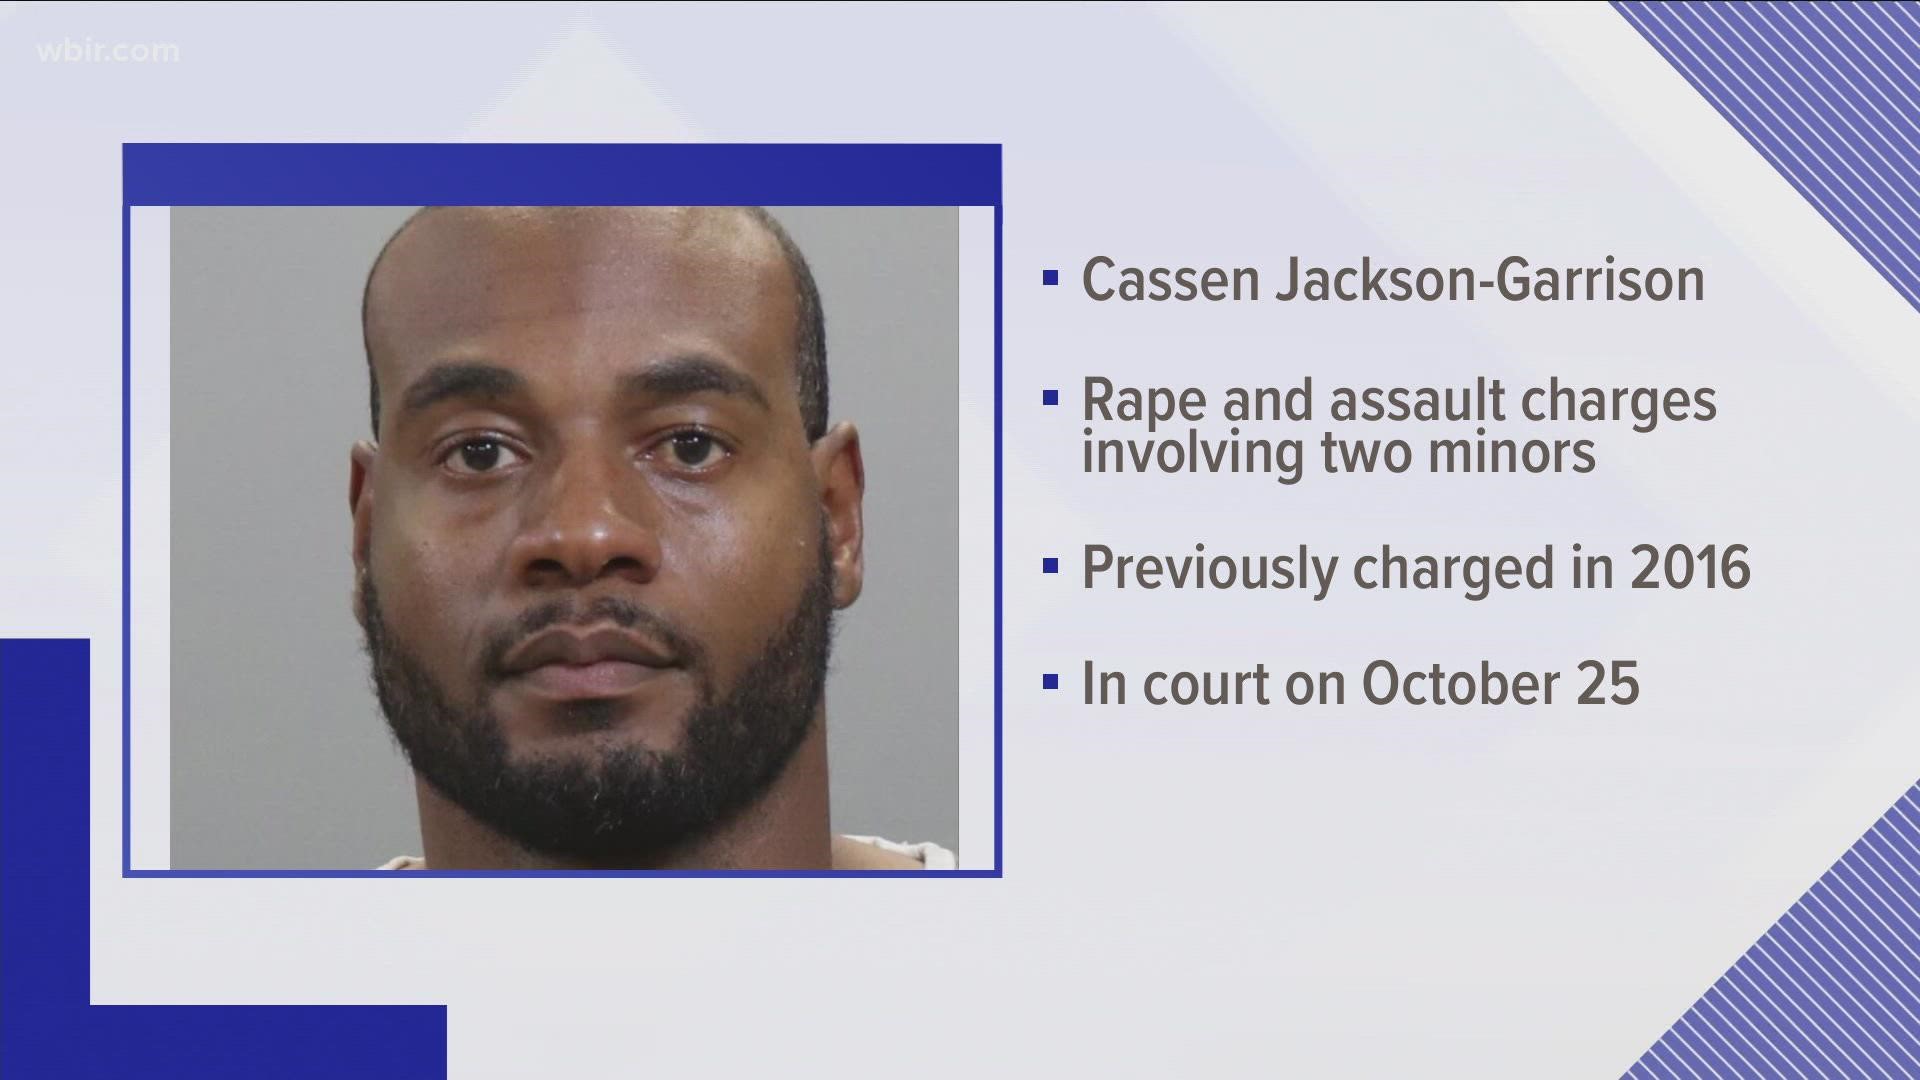 According to records, Cassen Jackson-Garrison will appear in court on Oct. 25 for several charges related to sex crimes.